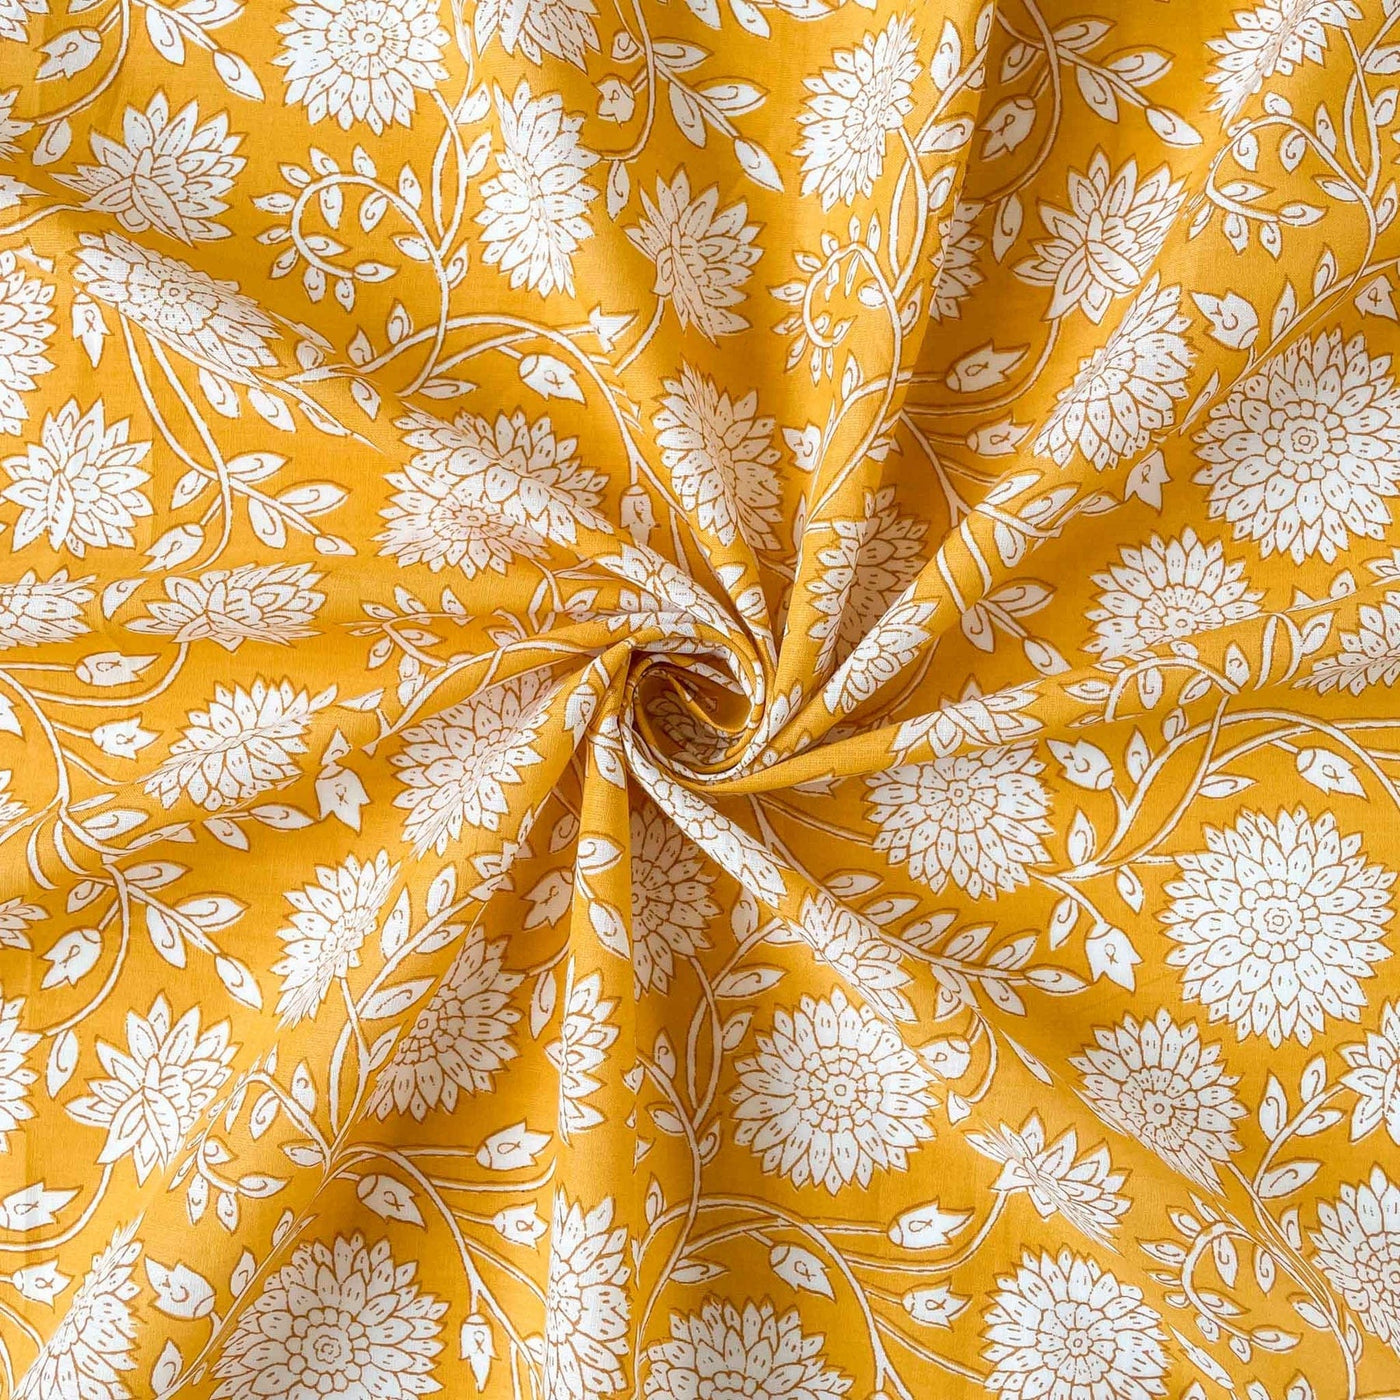 Fabric Pandit Fabric Light Yellow and White Foral All Over Hand Block Printed Pure Cotton Fabric (Width 43 inches)